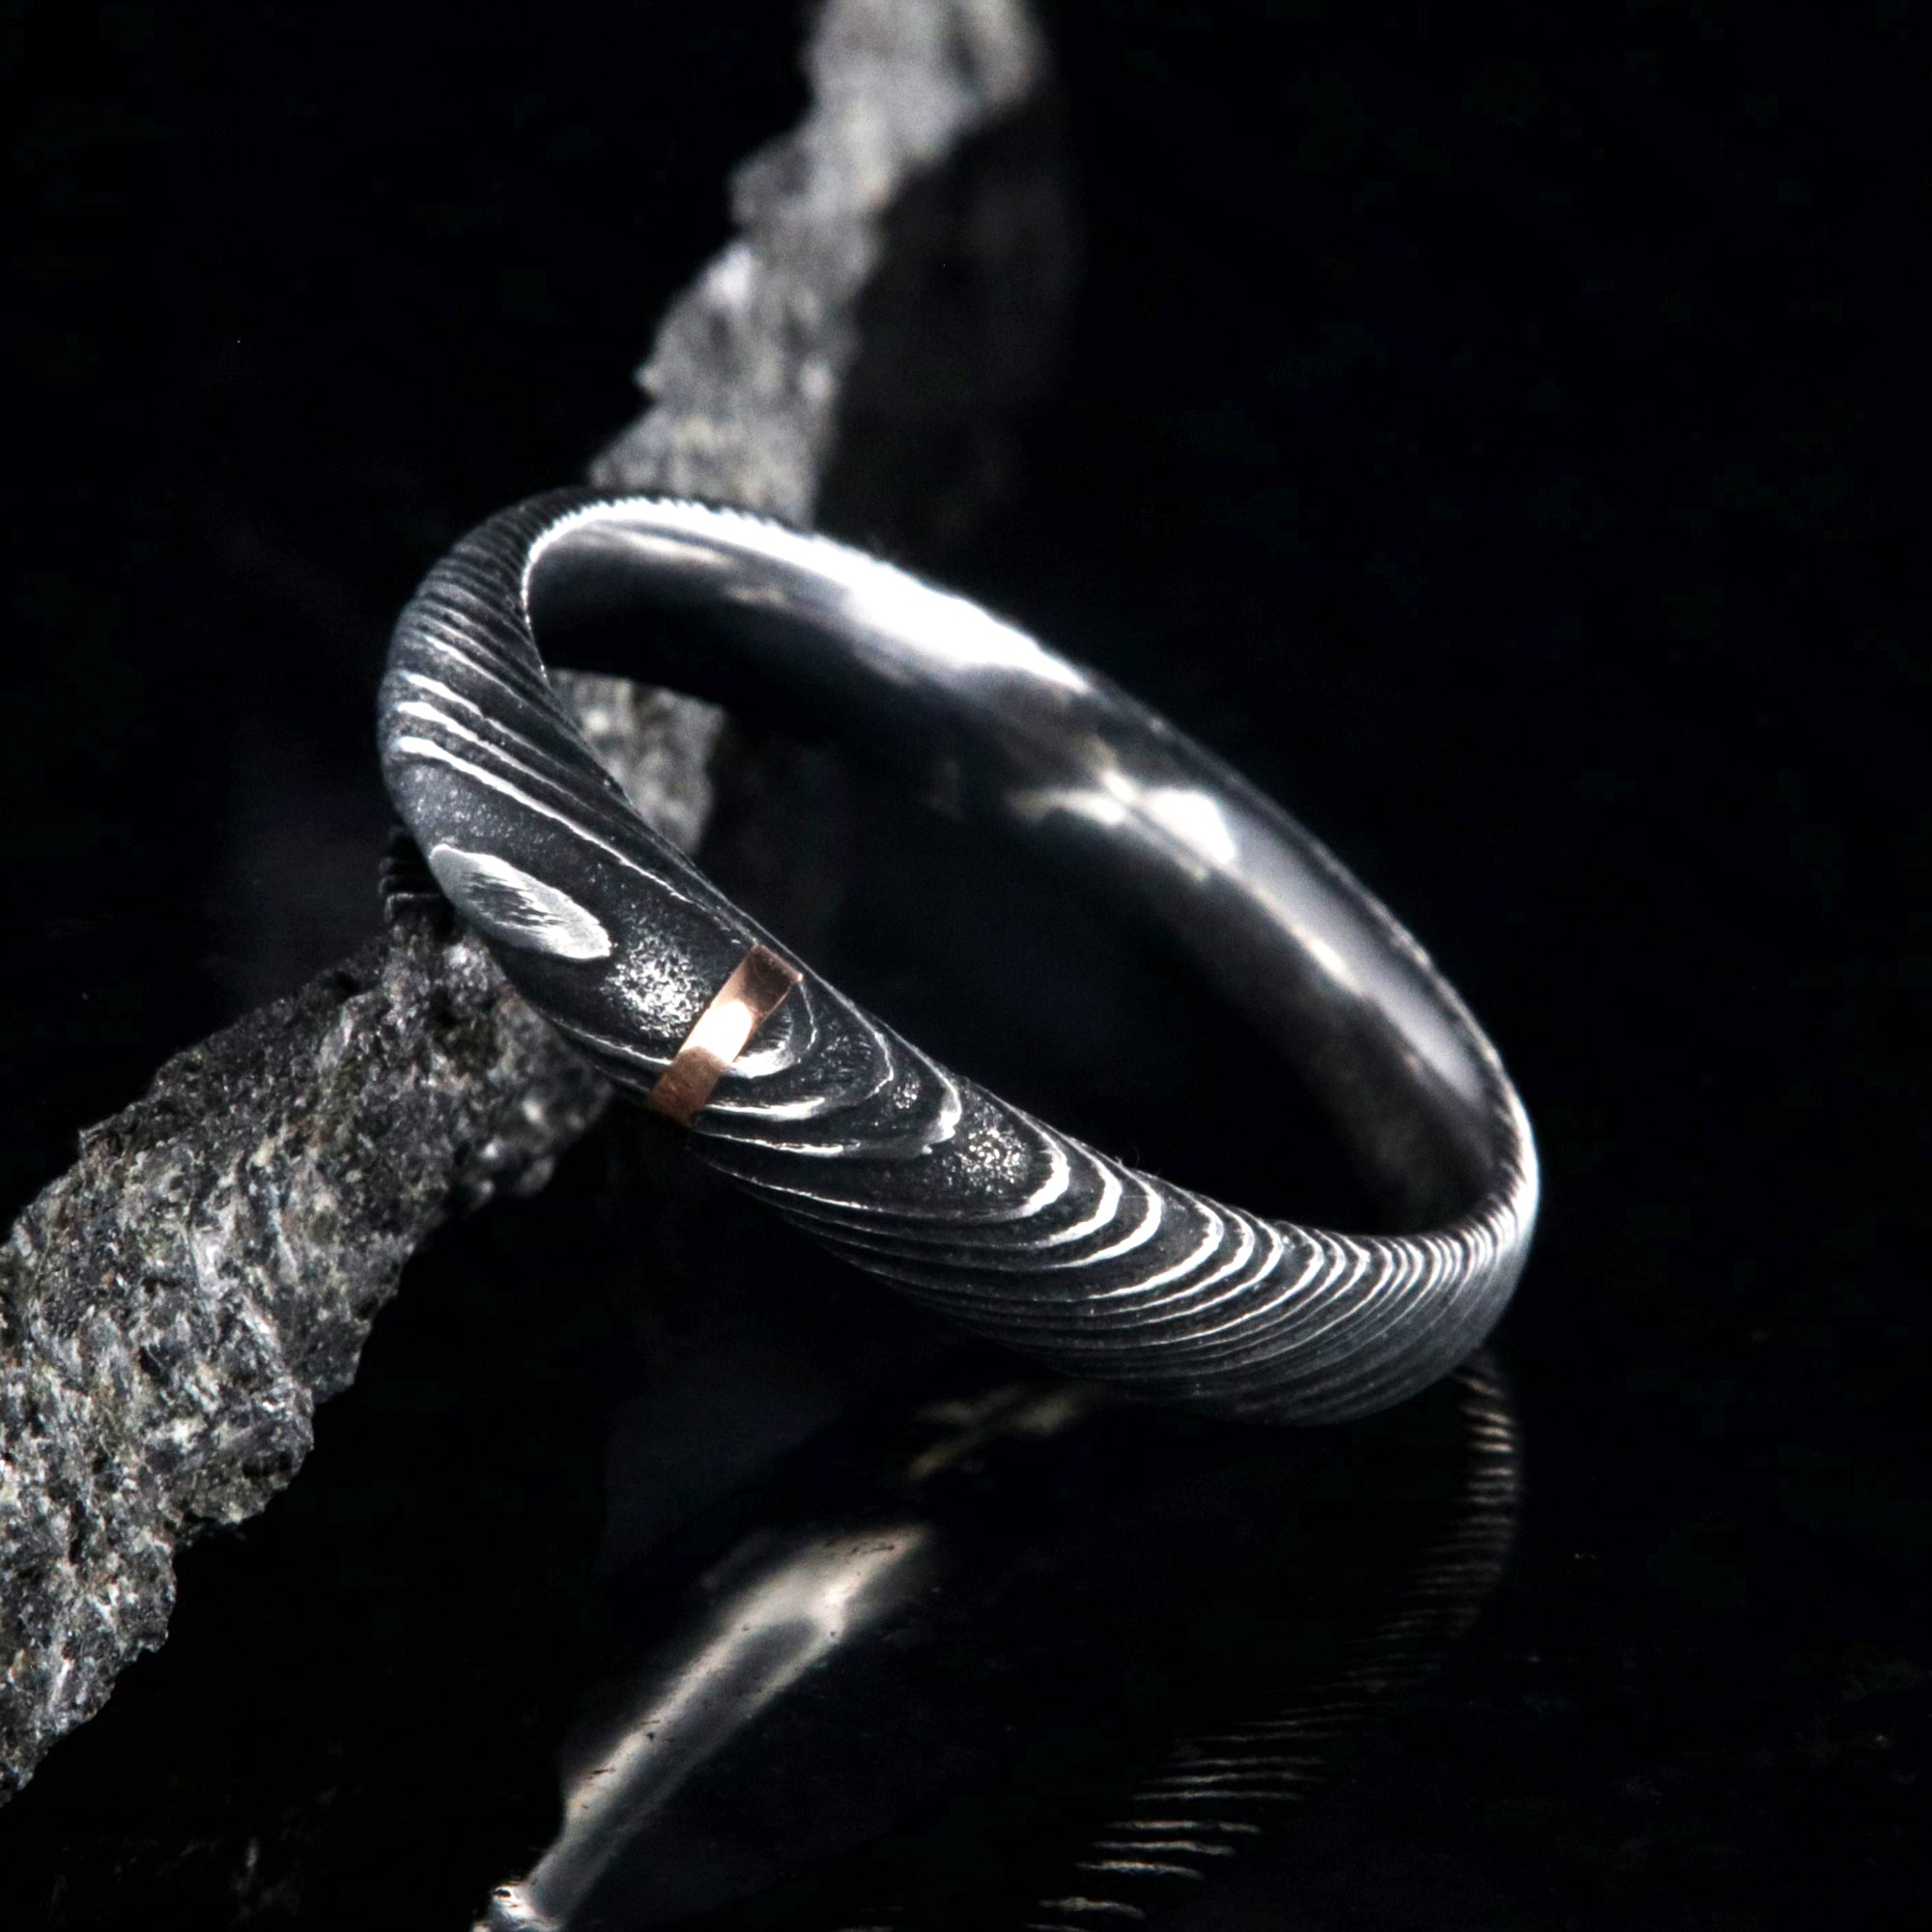 4mm wide black Damascus steel wedding band with a single vertical rose gold inlay